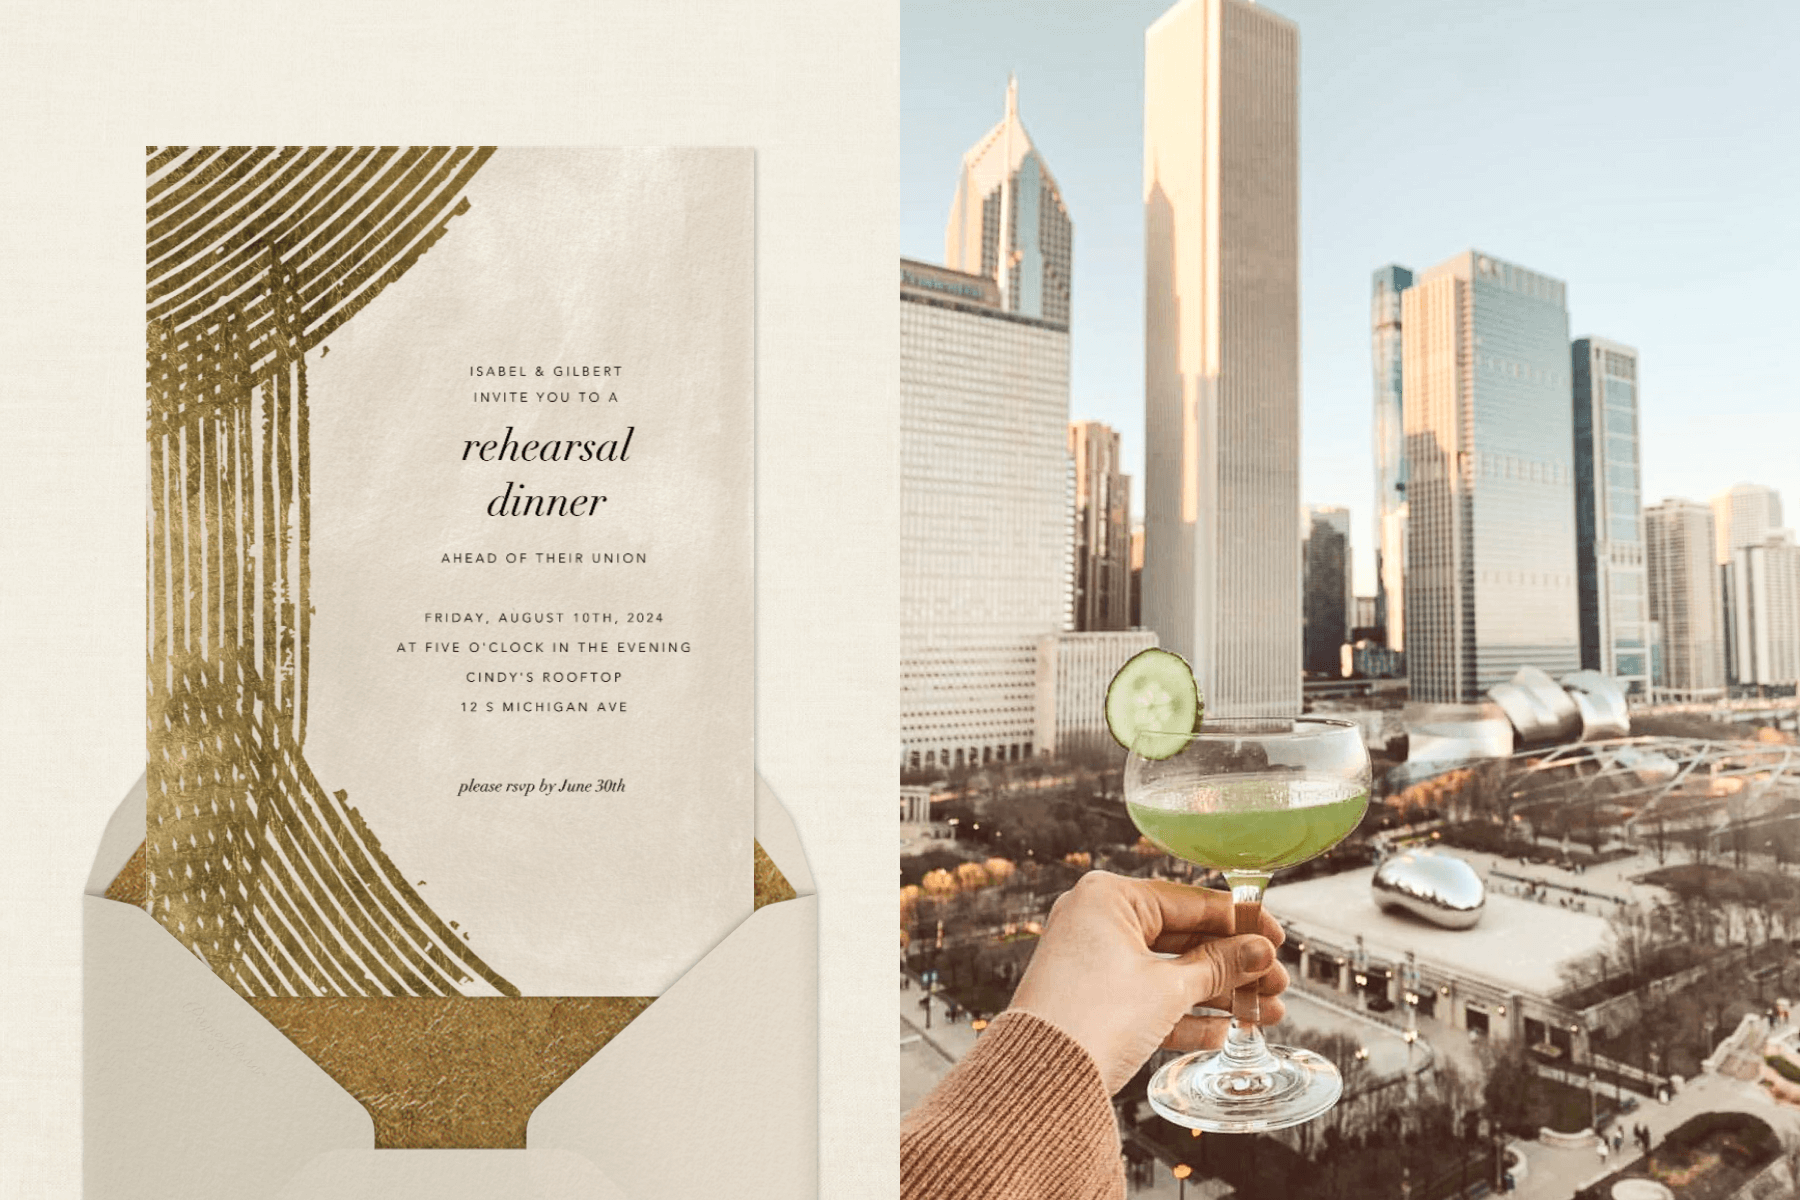 Left: A rehearsal dinner invitation with abstract gold streaks overlapping on the left side. Right: A hand holds a coupe glass with green liquid and a cucumber garnish from a rooftop with notable Chicago landmarks in the background.